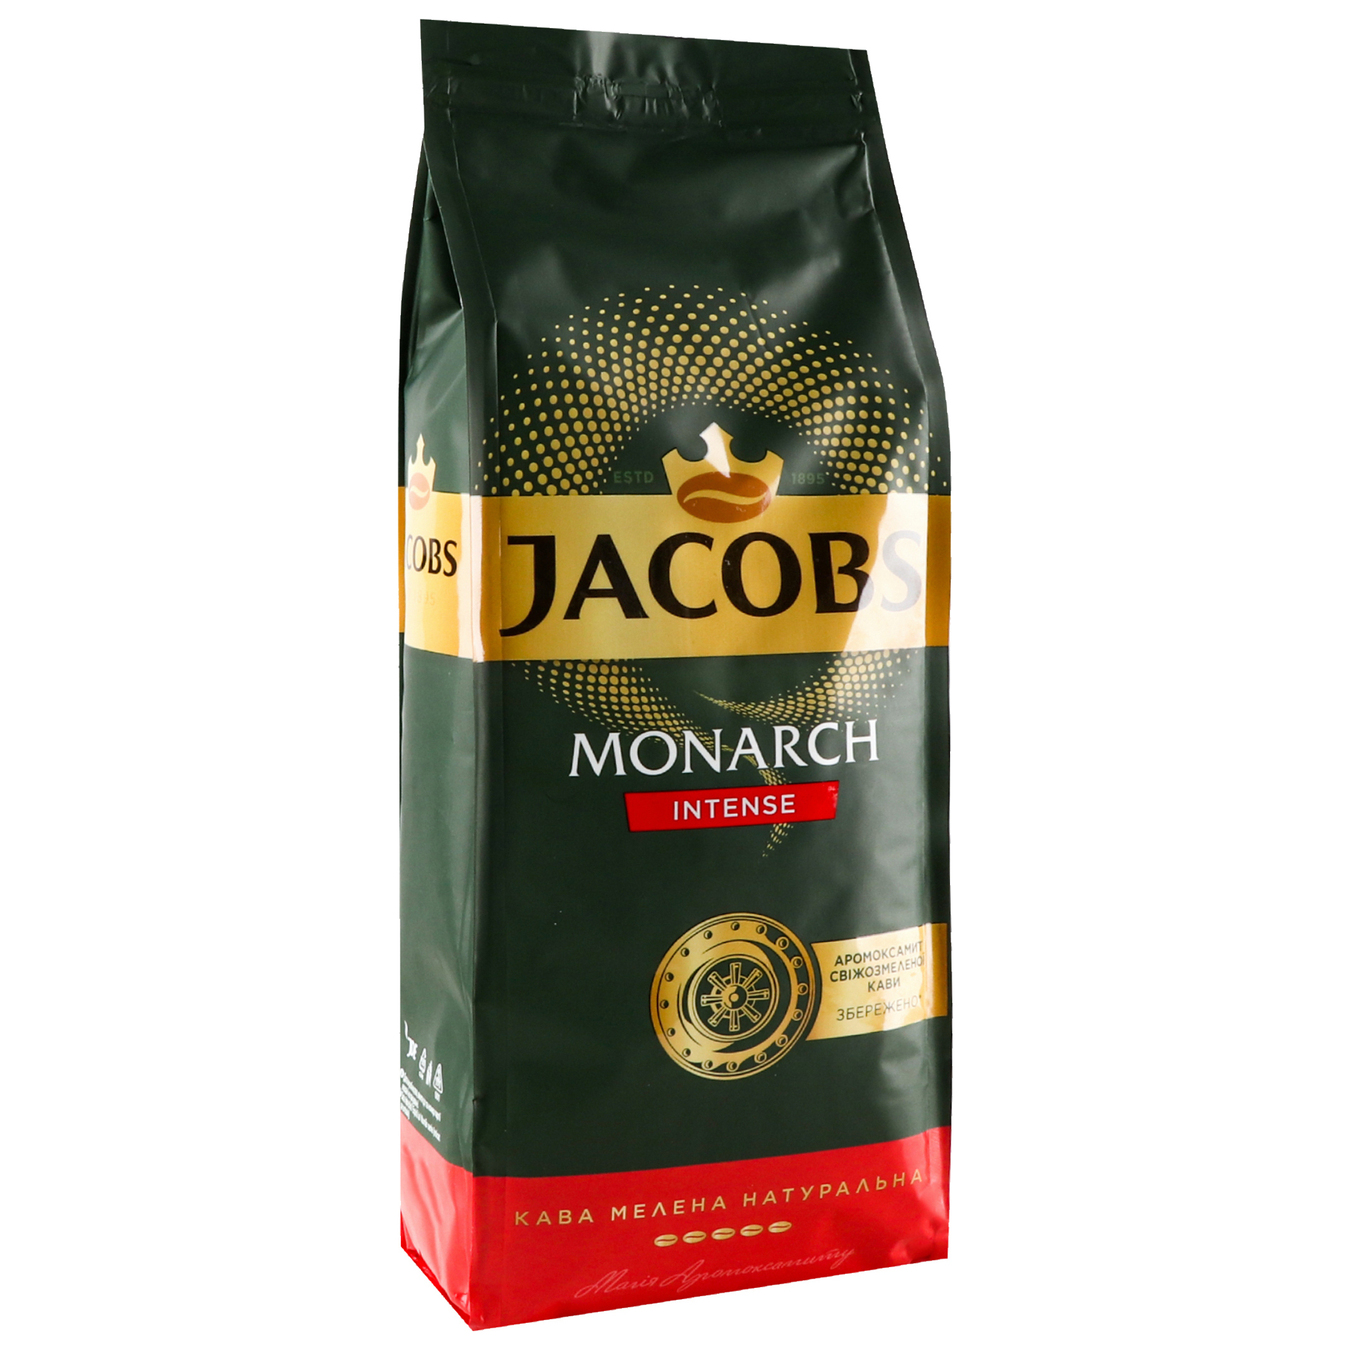 JACOBS MONARCH INTENSE natural roasted ground coffee 400g 5